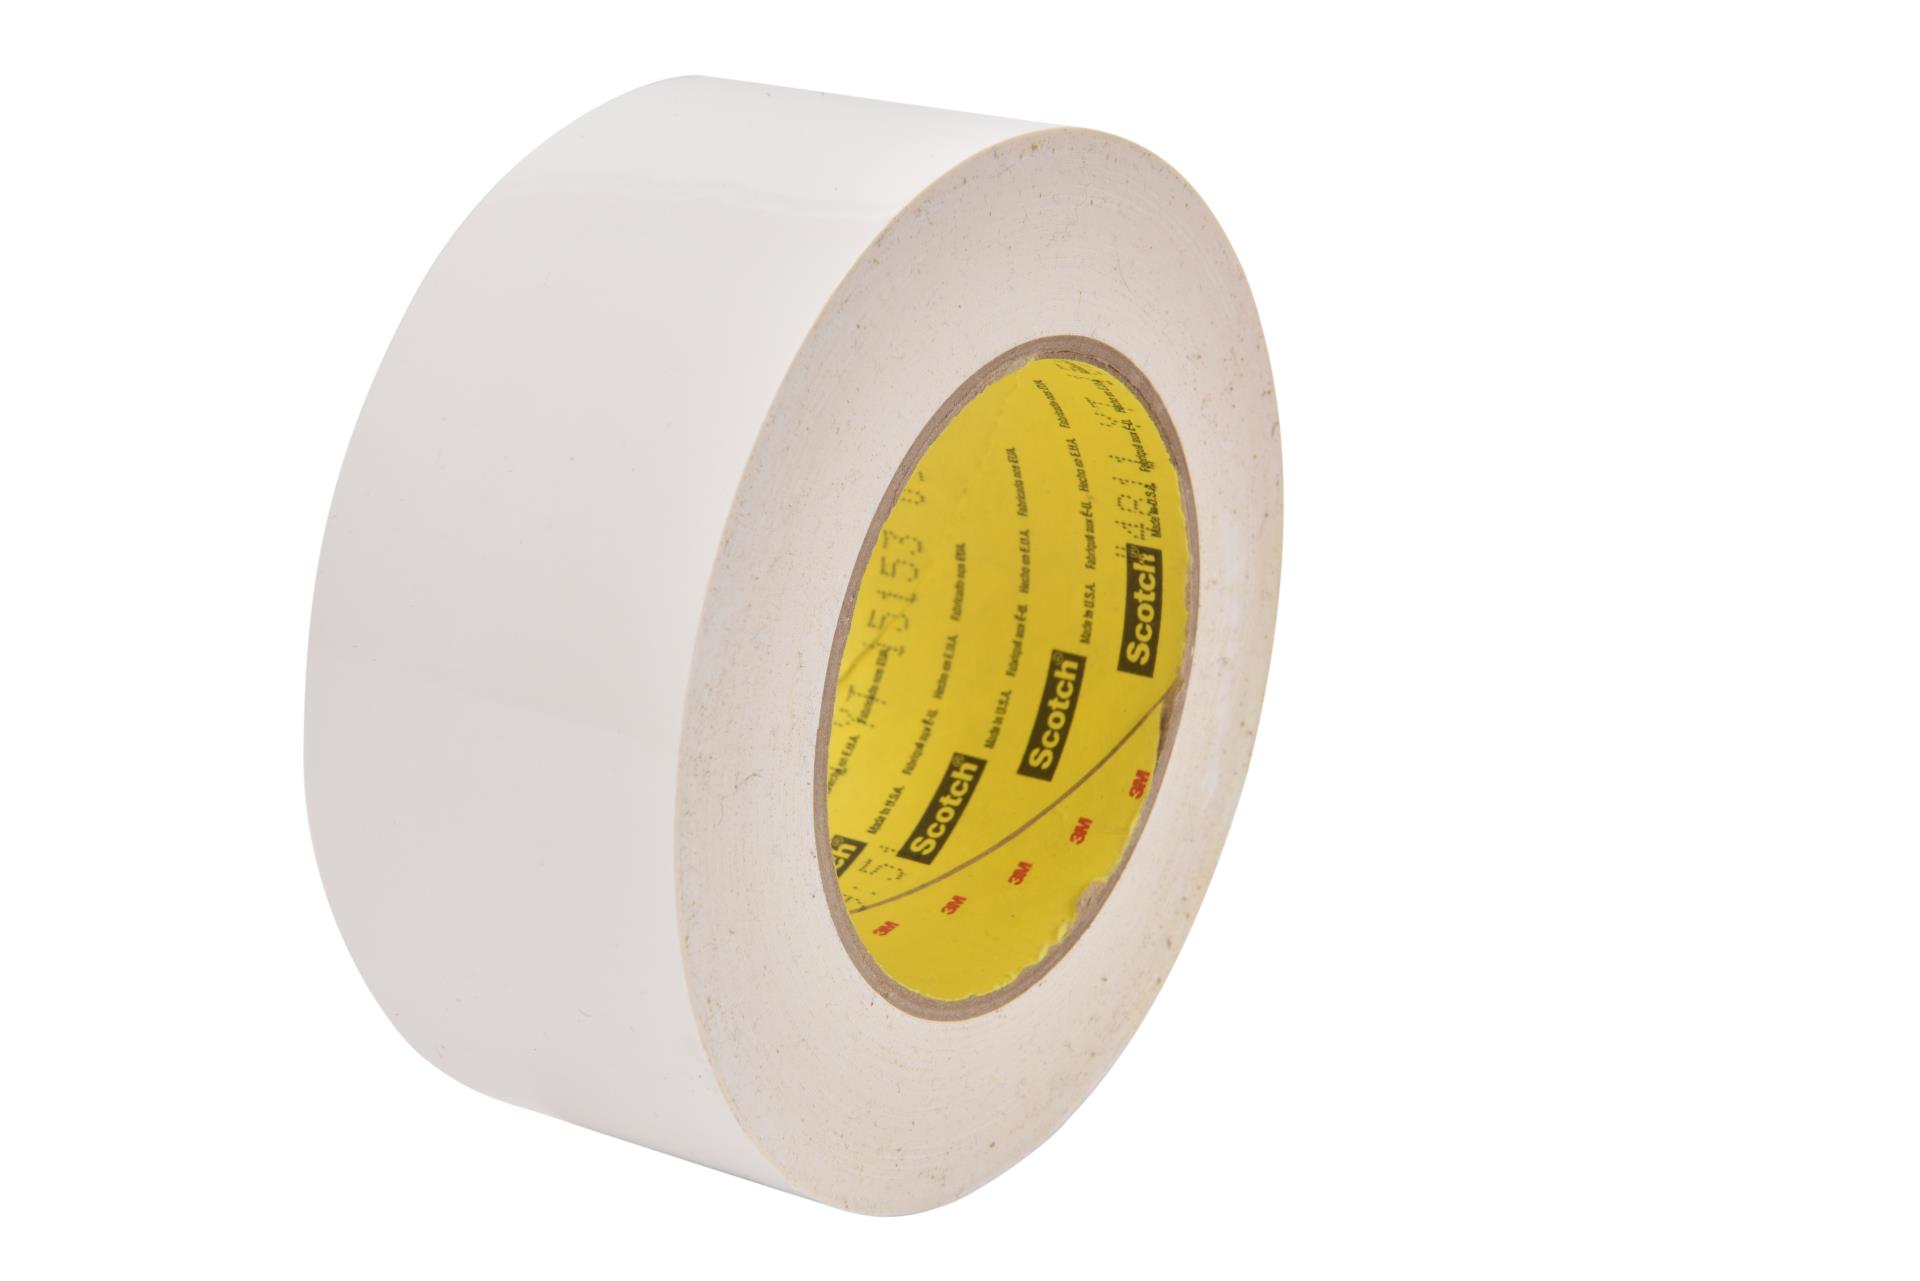 00021200967696 3M™ Preservation Sealing Tape 4811, White, in x 36 yd,  9.5 mil, 12 rolls per case, Silicone Free Aircraft products sealing- tapes 9346680